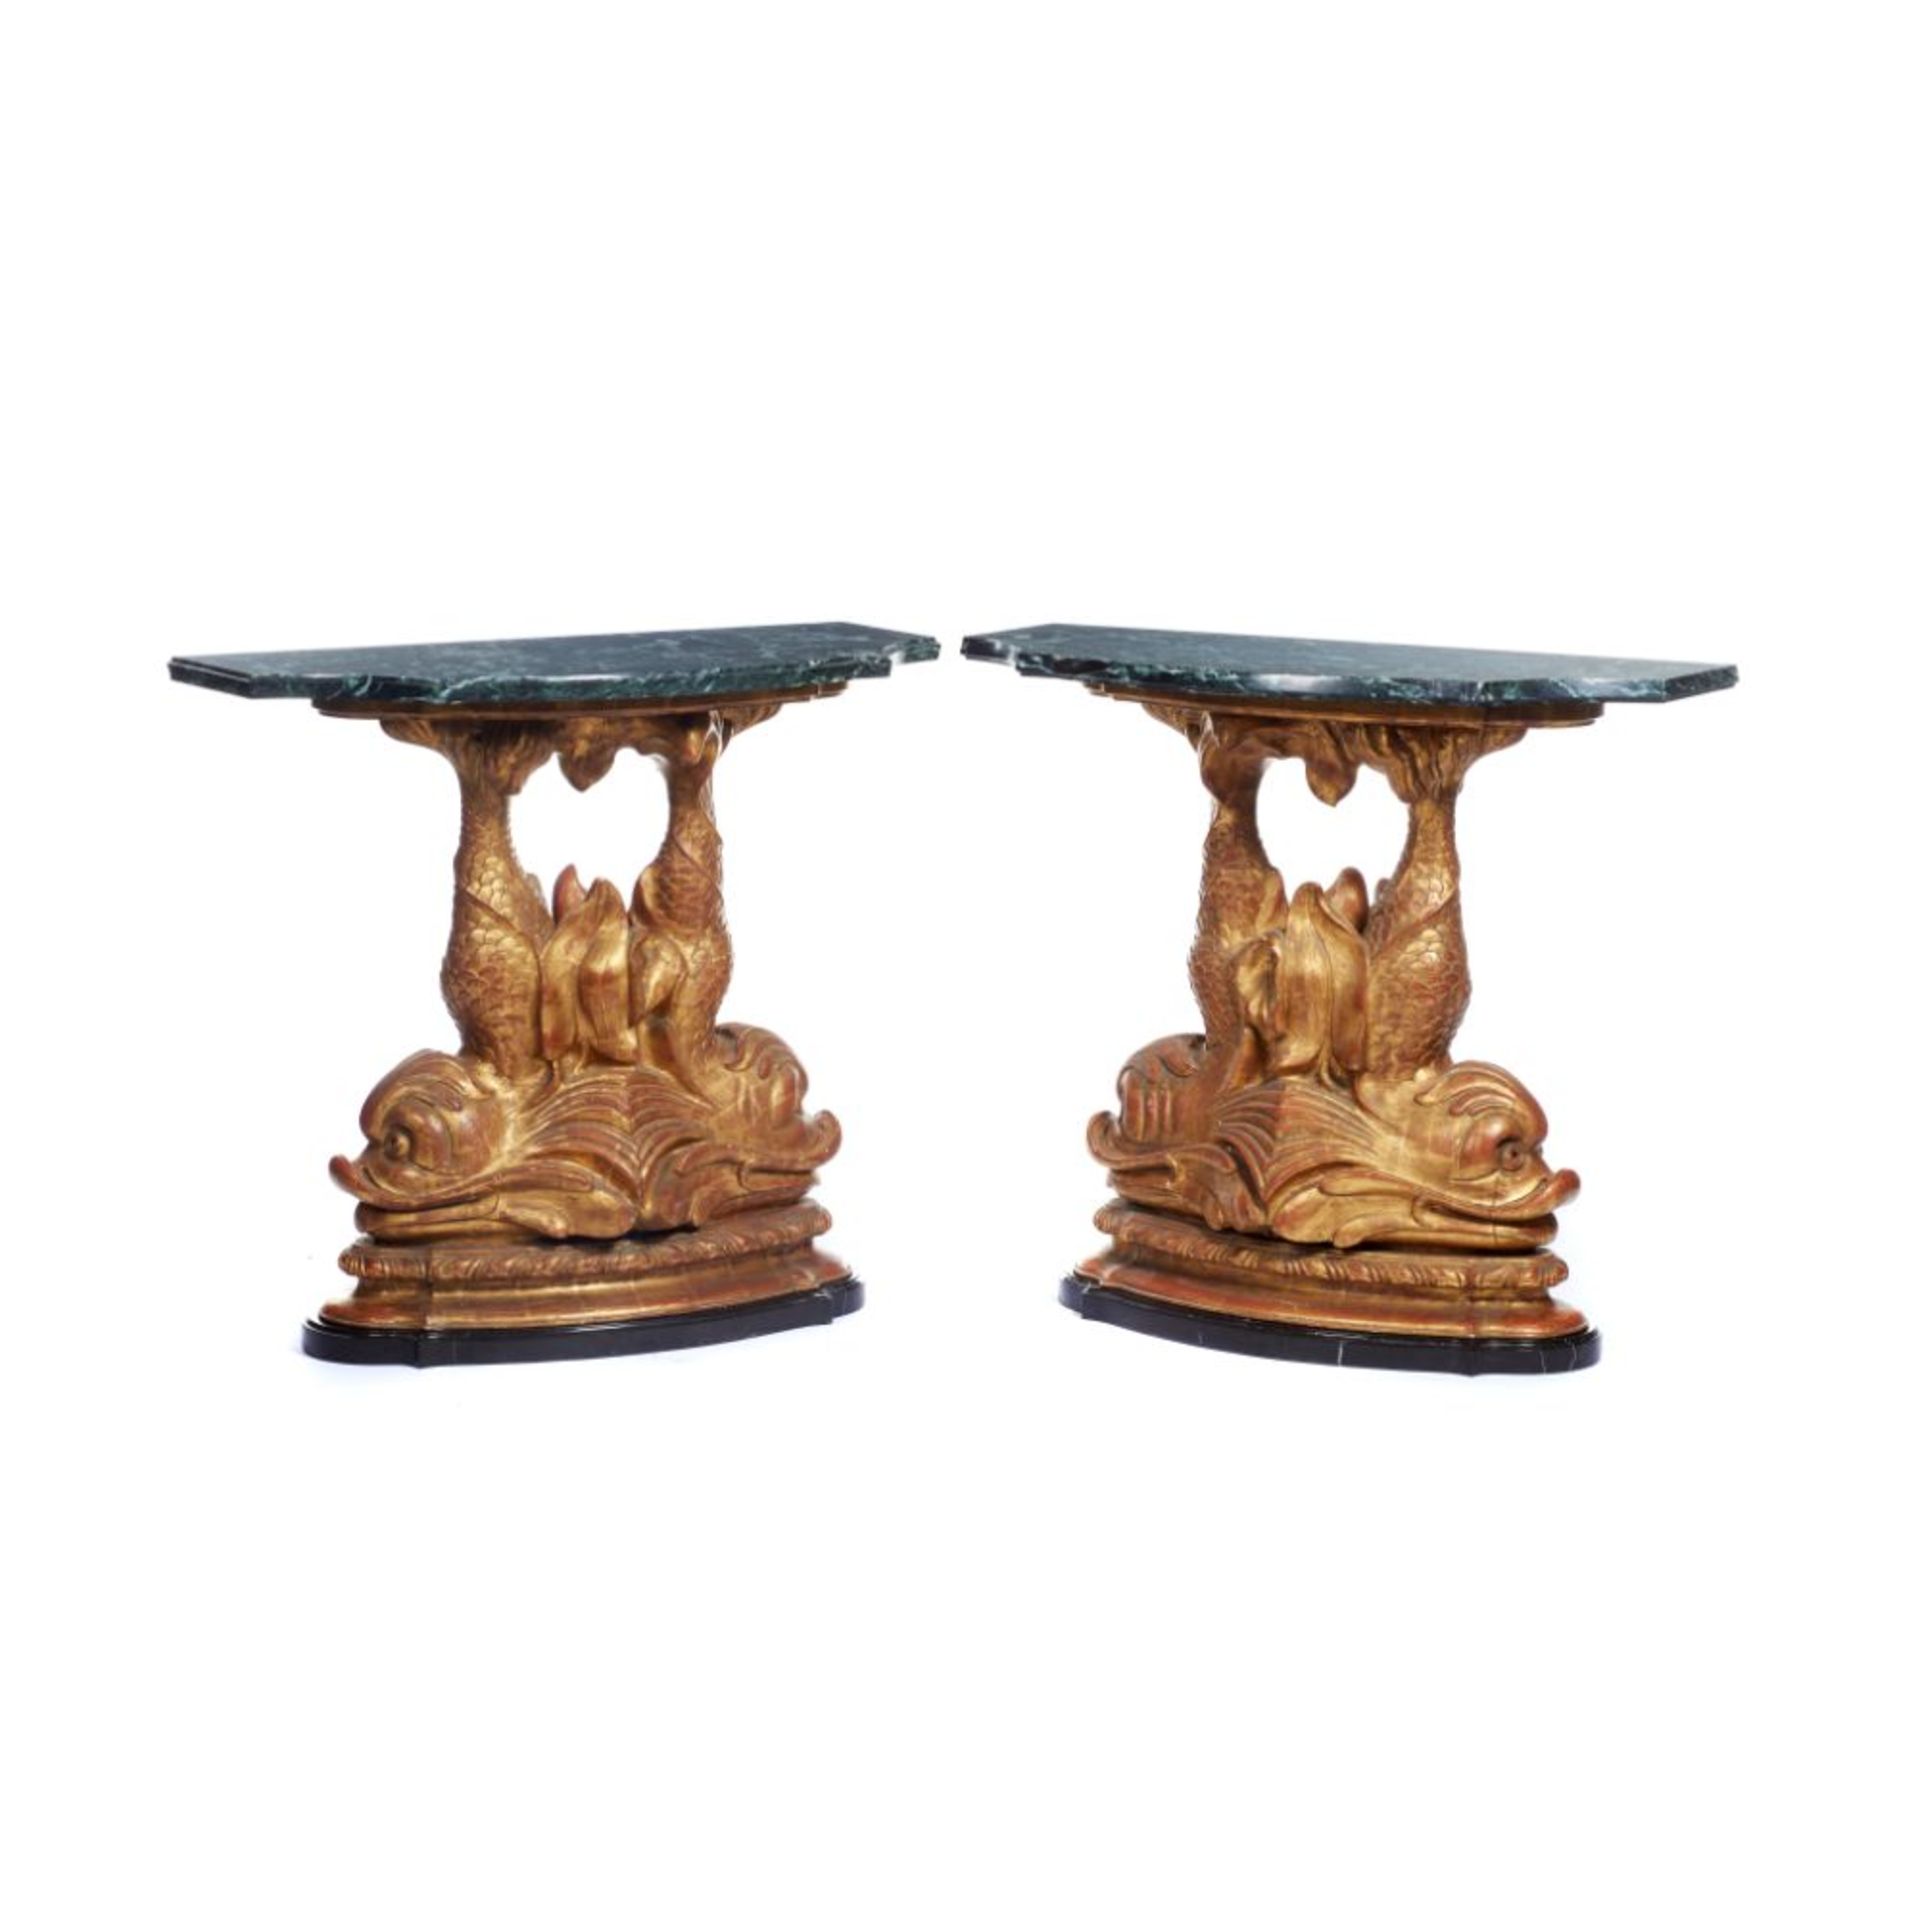 A pair of consoles, Carved and gilt wood, Black and green marble tops on two dolphin shaped